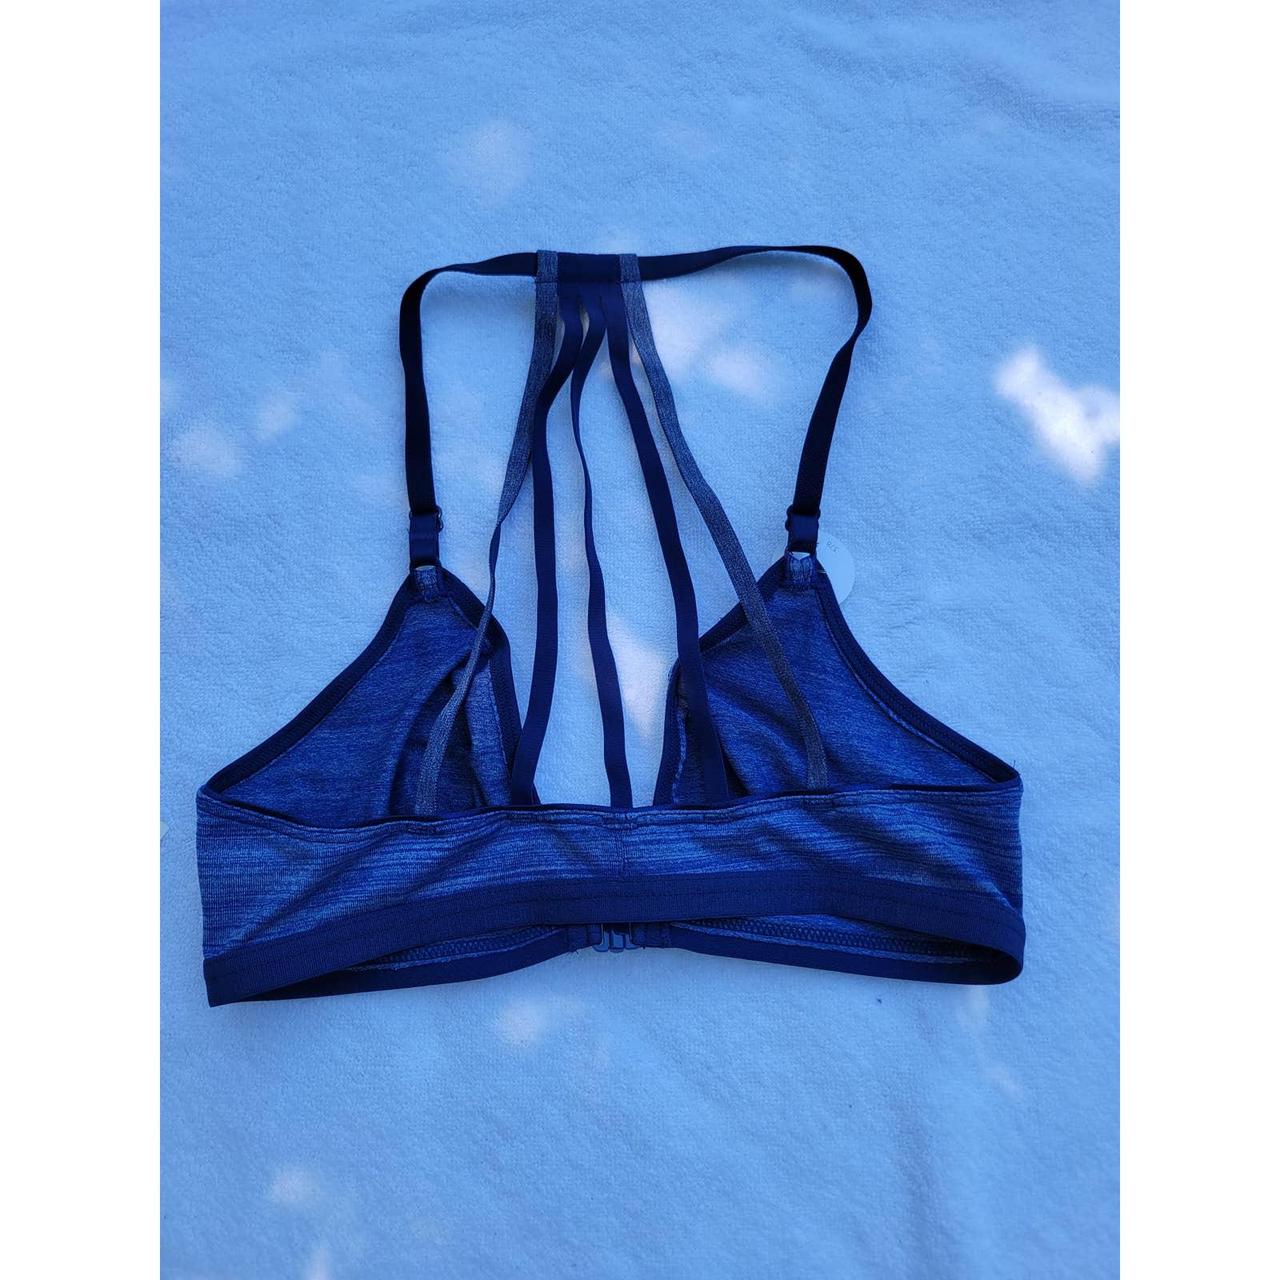 Product Image 2 - B. Tempt’d bralette
Size Small
Blue 
New